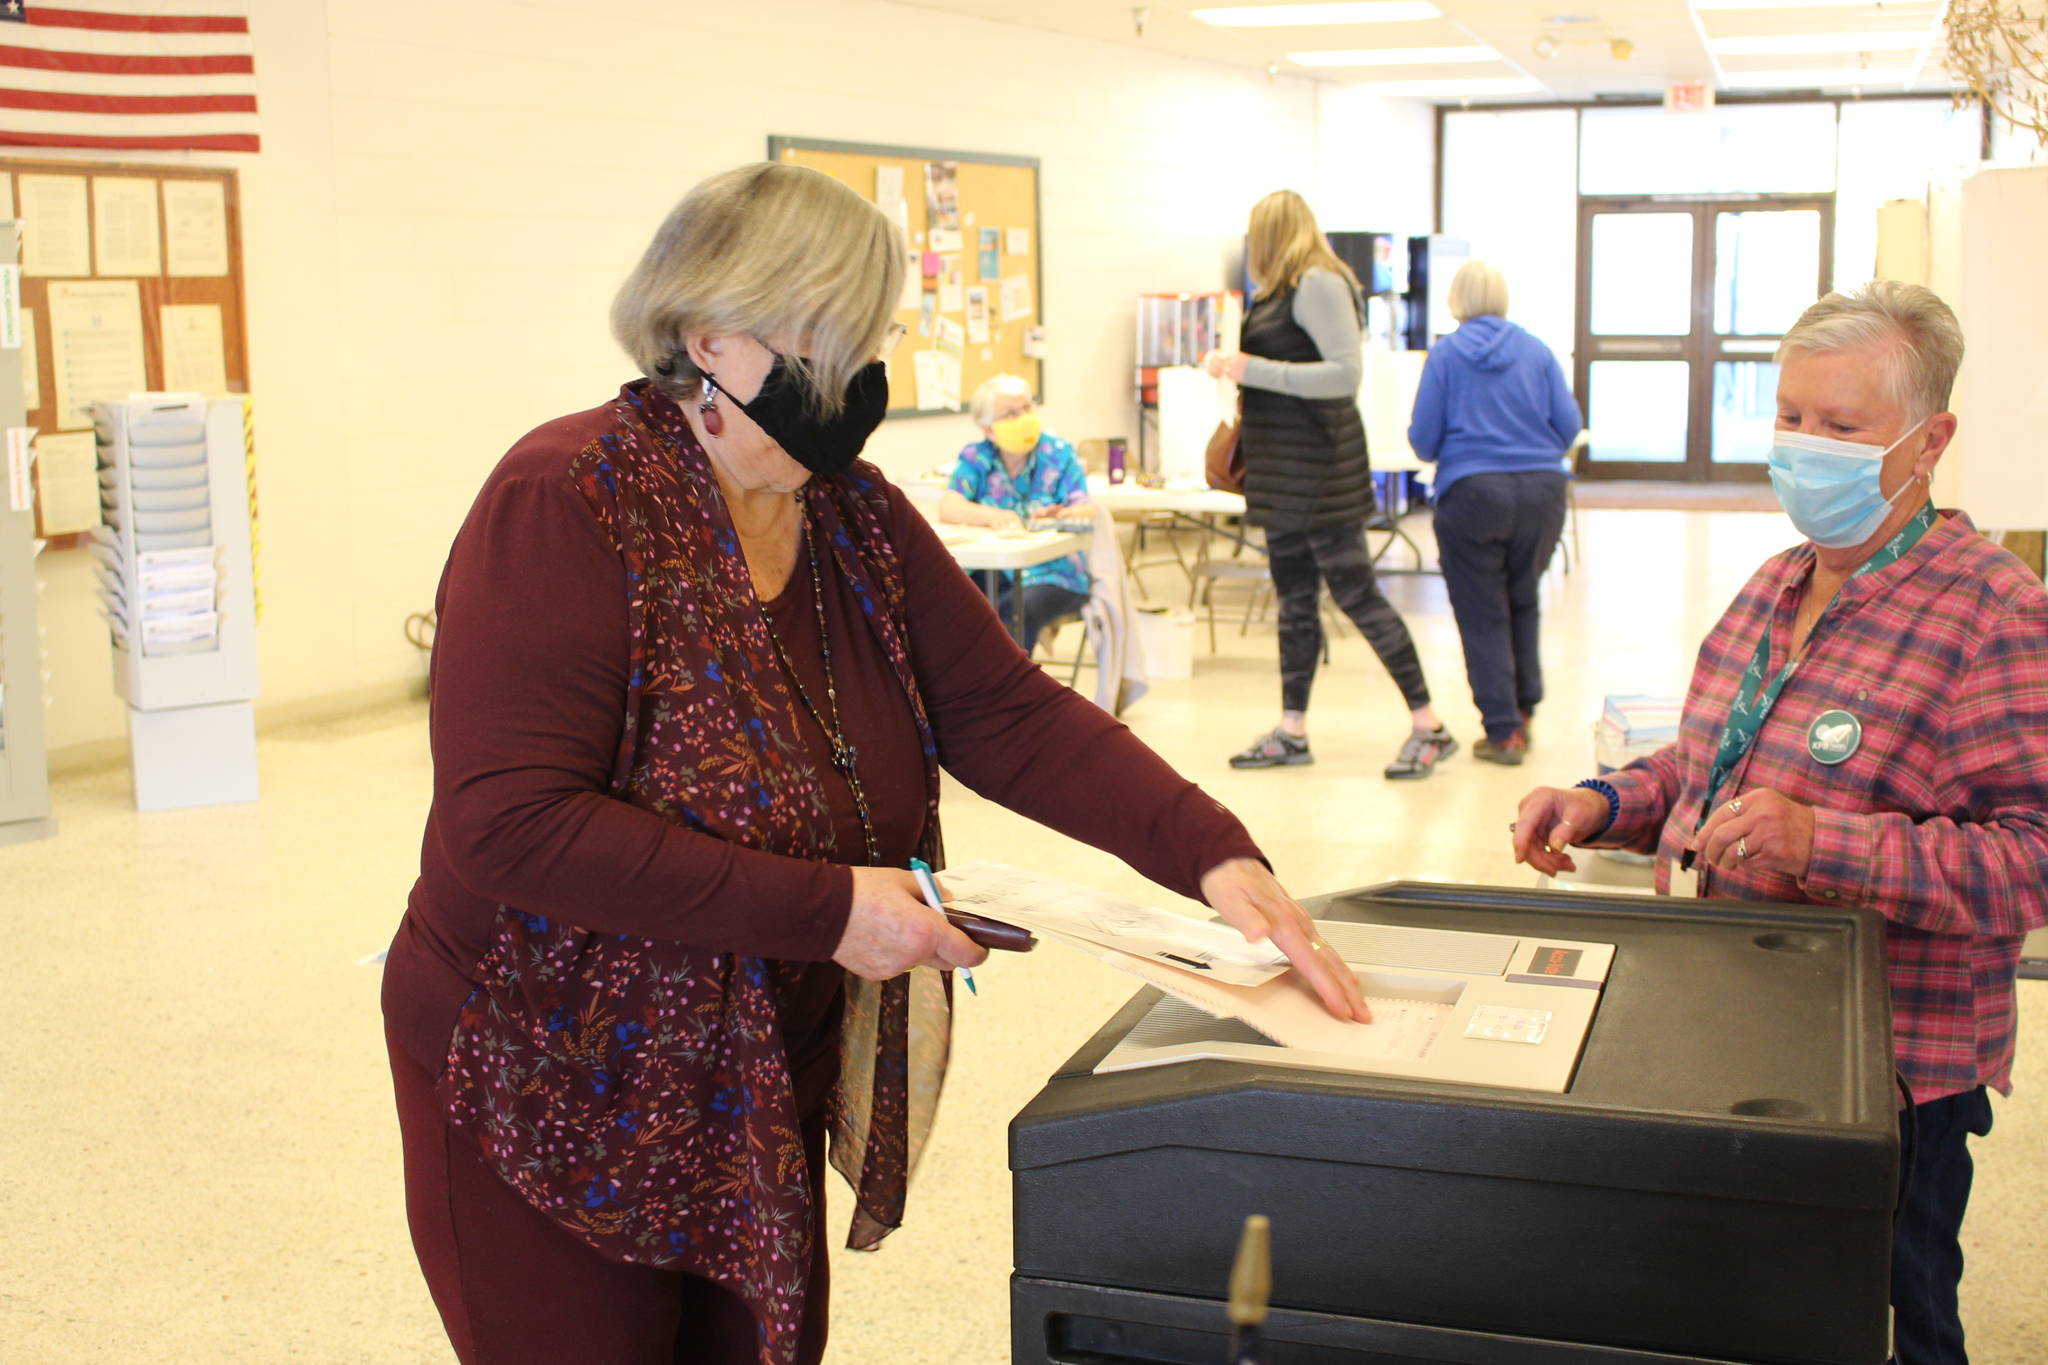 Marcia Heinrich casts her ballot for the municipal elections in Kenai, Alaska on Oct. 6, 2020. (Photo by Brian Mazurek/Peninsula Clarion)